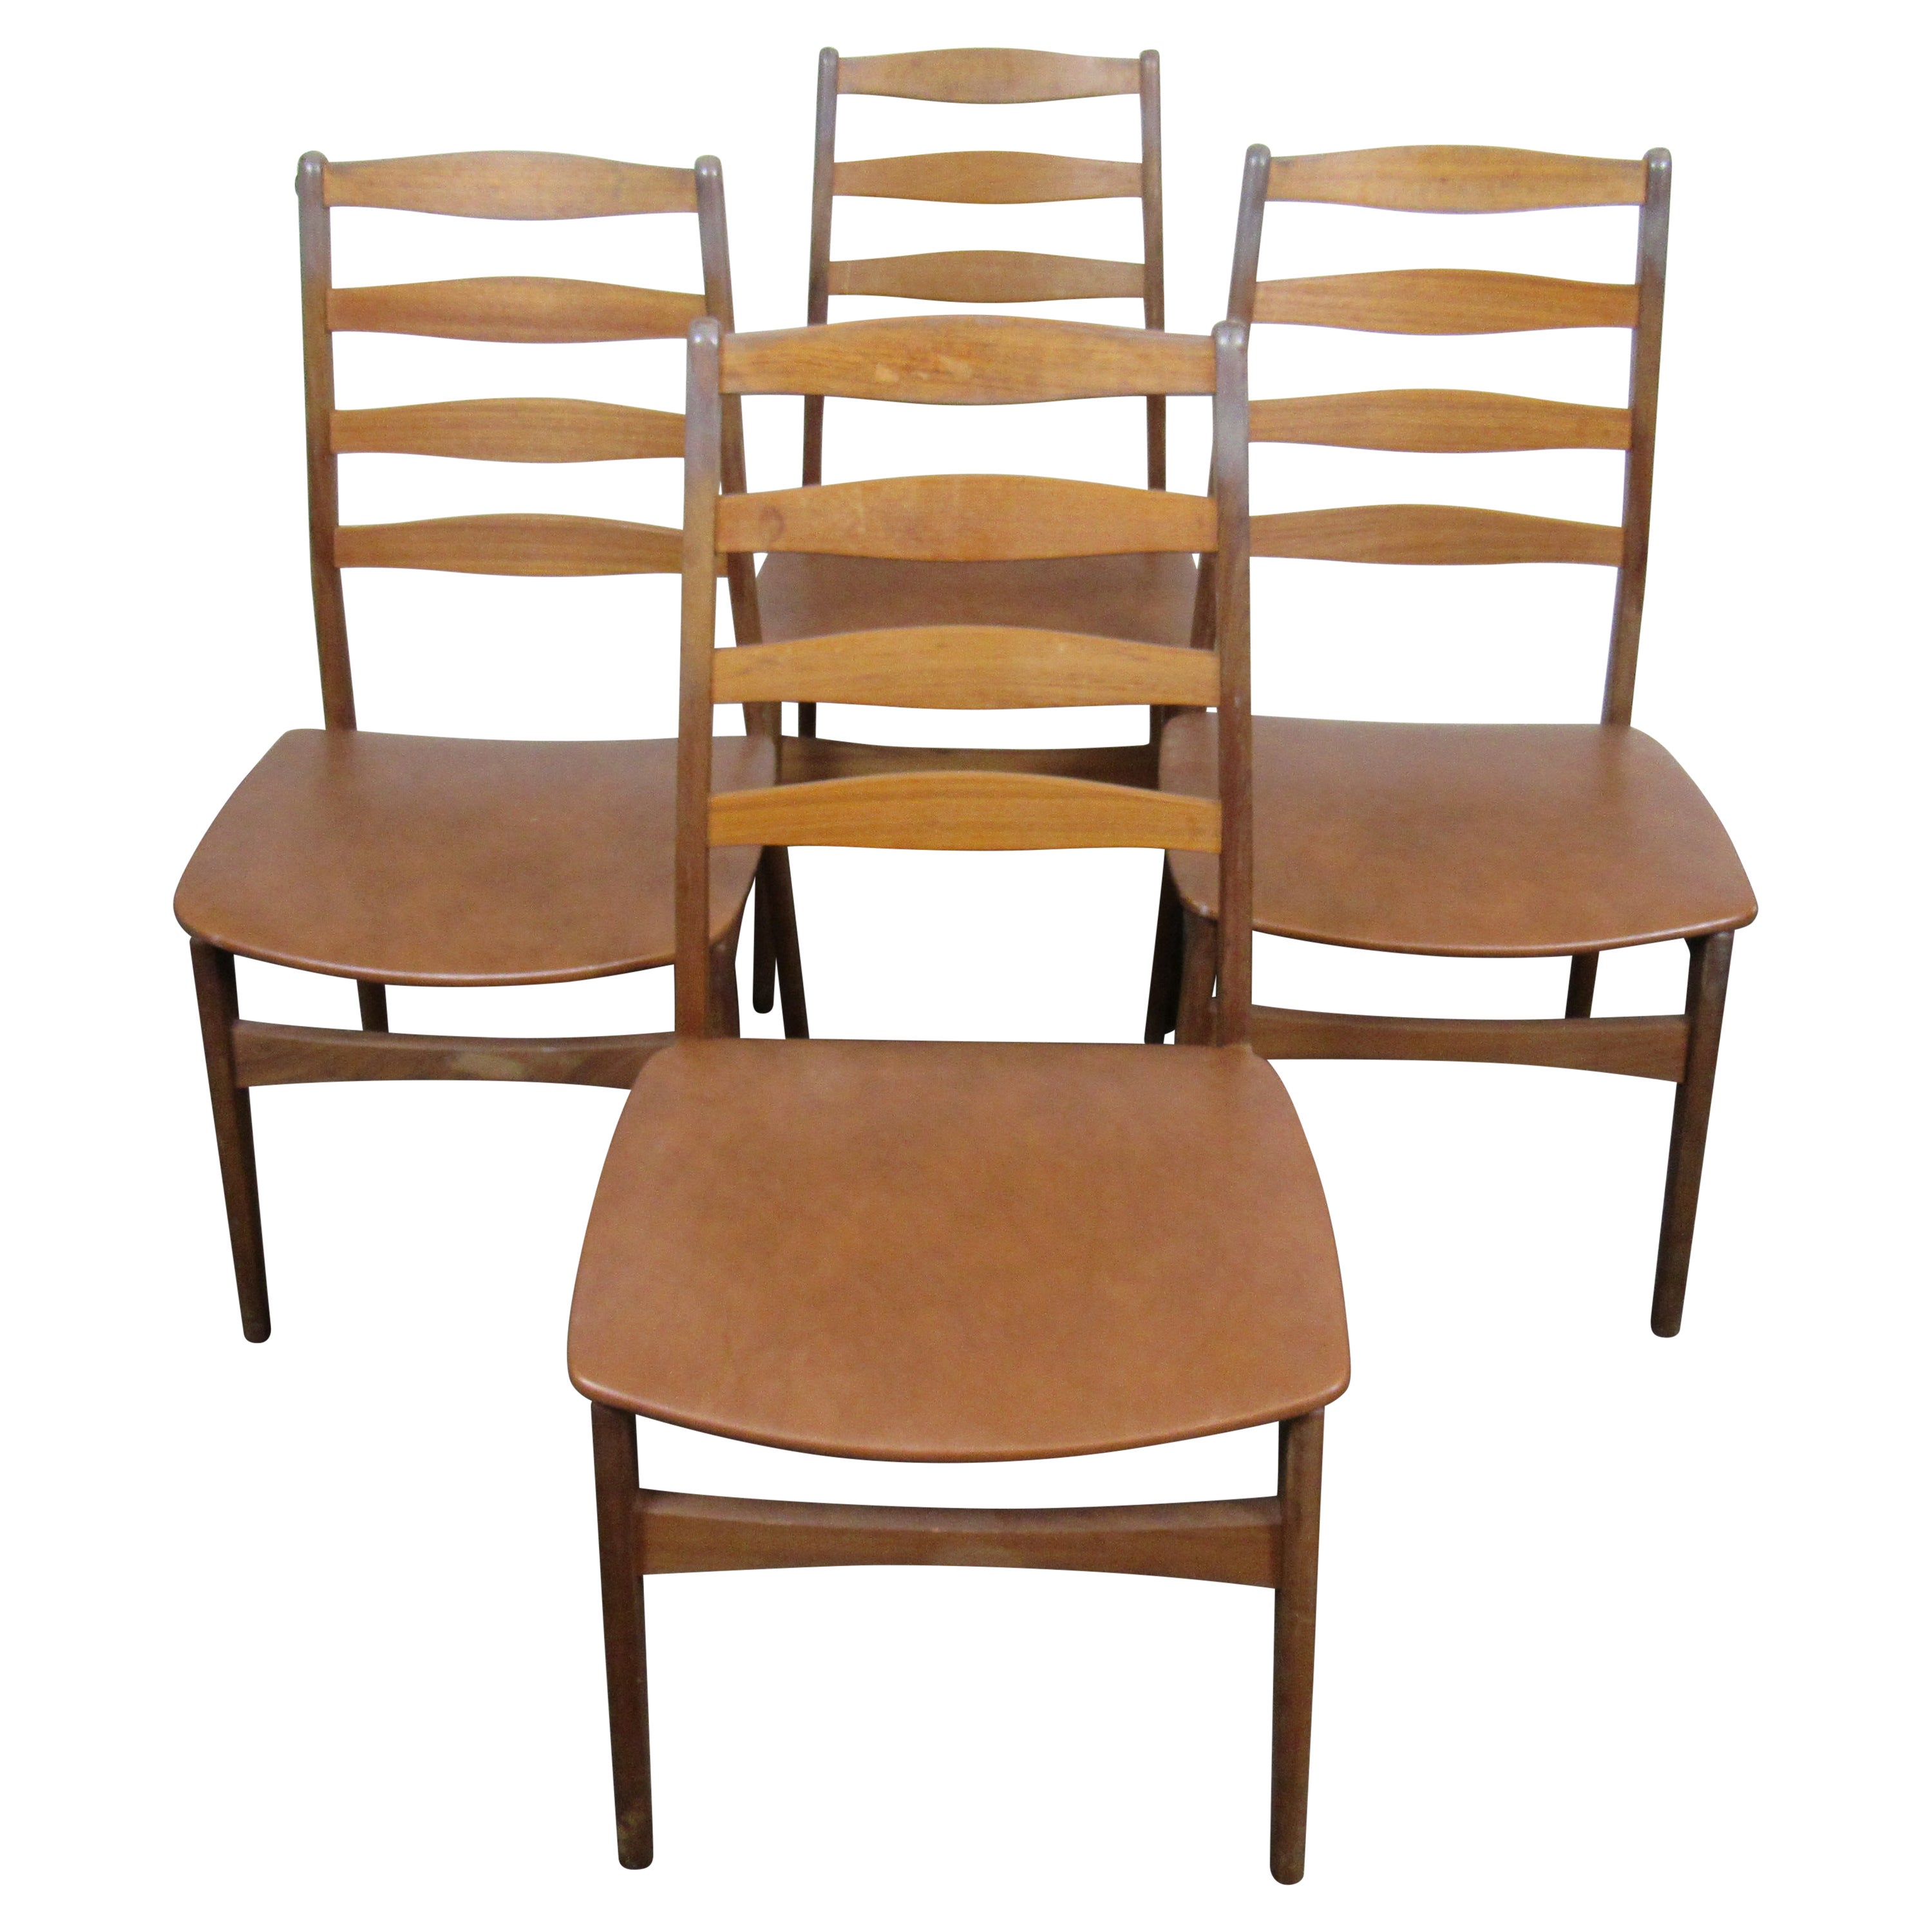 Set of Four Danish Dining Room Chairs